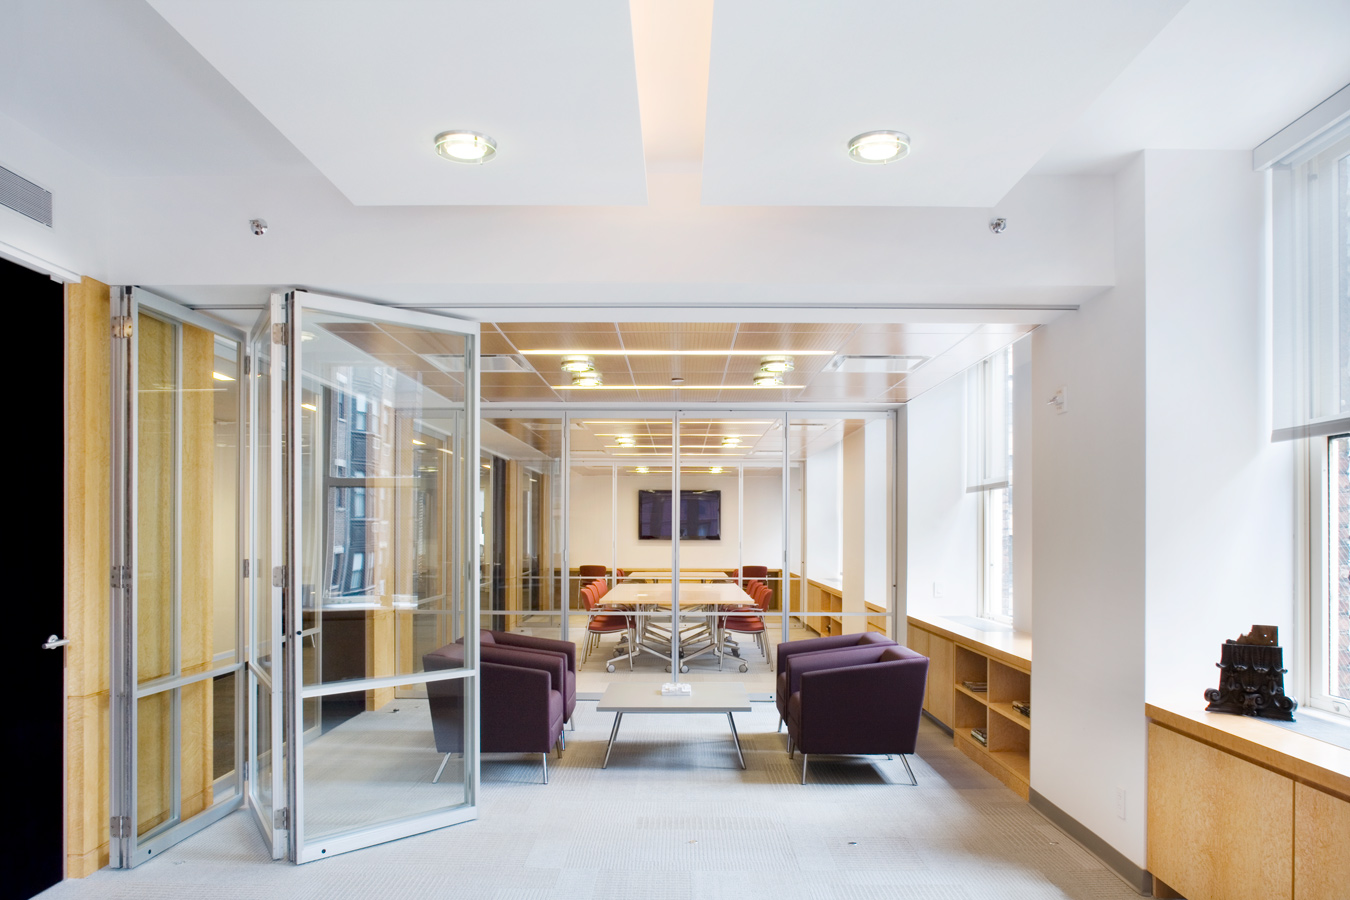 Project: Pontifical Society Offices - Folding Doors designed using PK-30 System